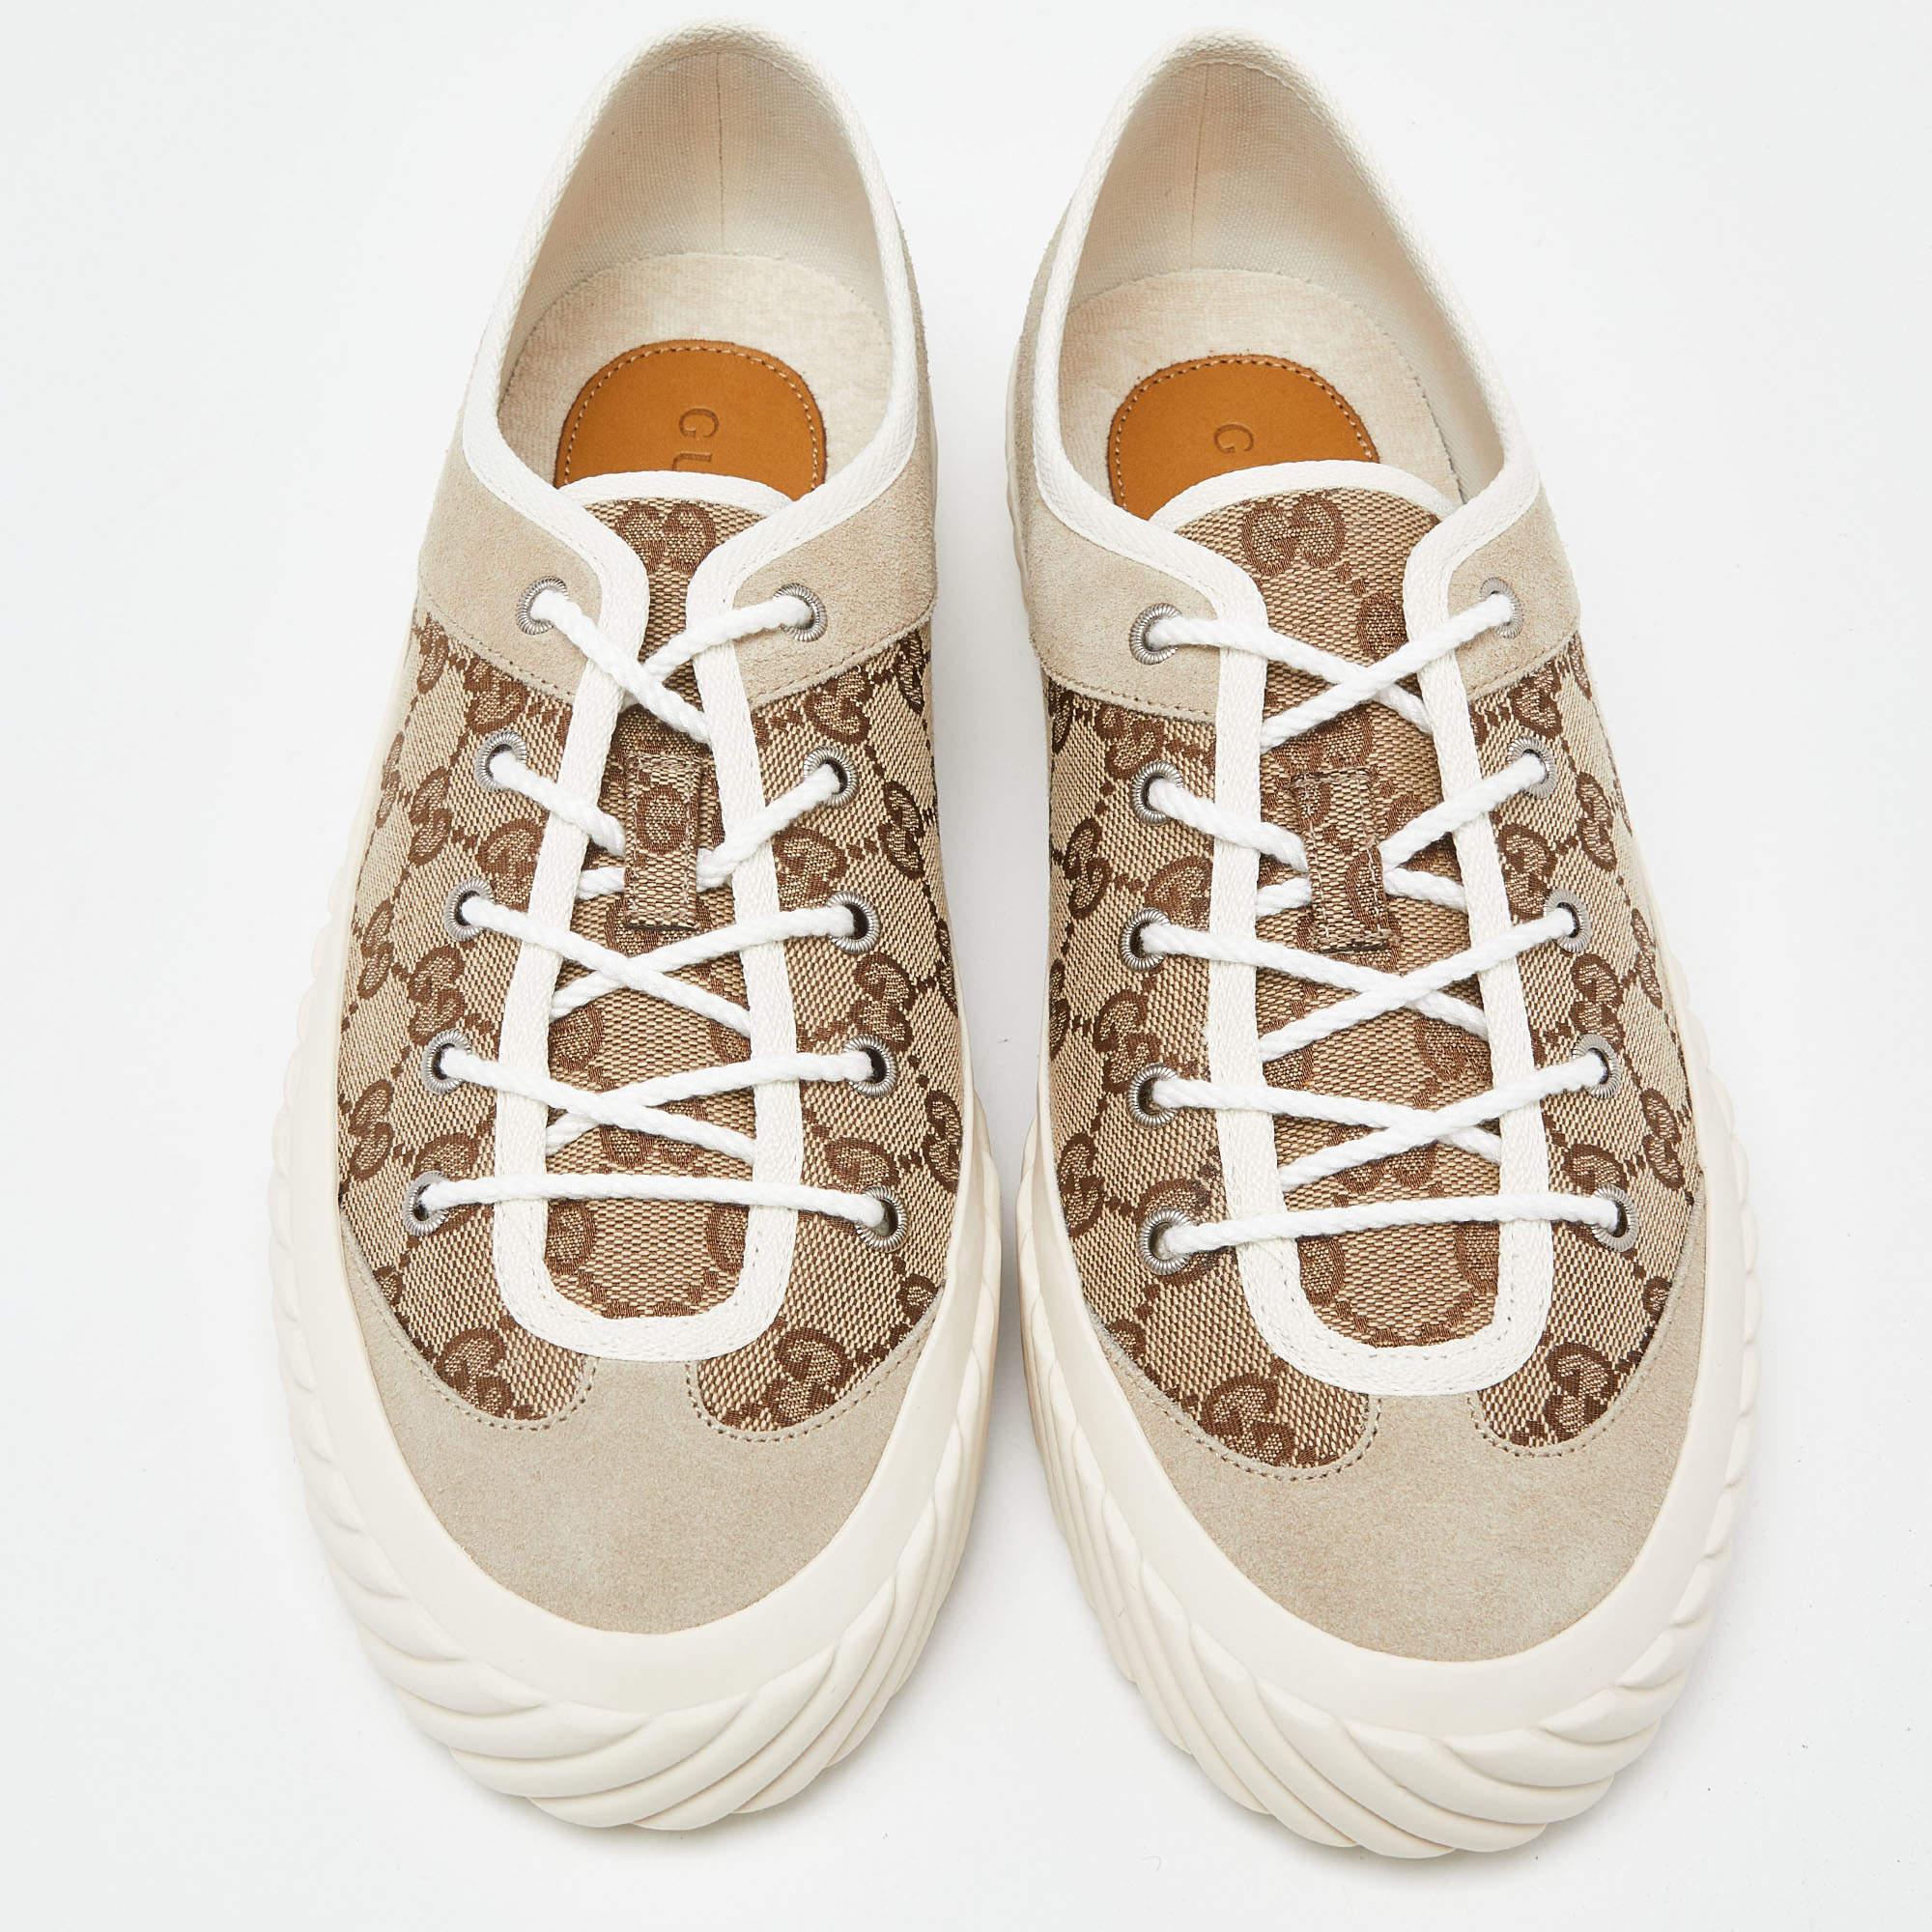 Give your outfit a chic update with this pair of designer sneakers. The creation is sewn perfectly to help you make a statement in them for a long time.

Includes: Original Dustbag, Original Box, Info Booklet, Extra Laces

